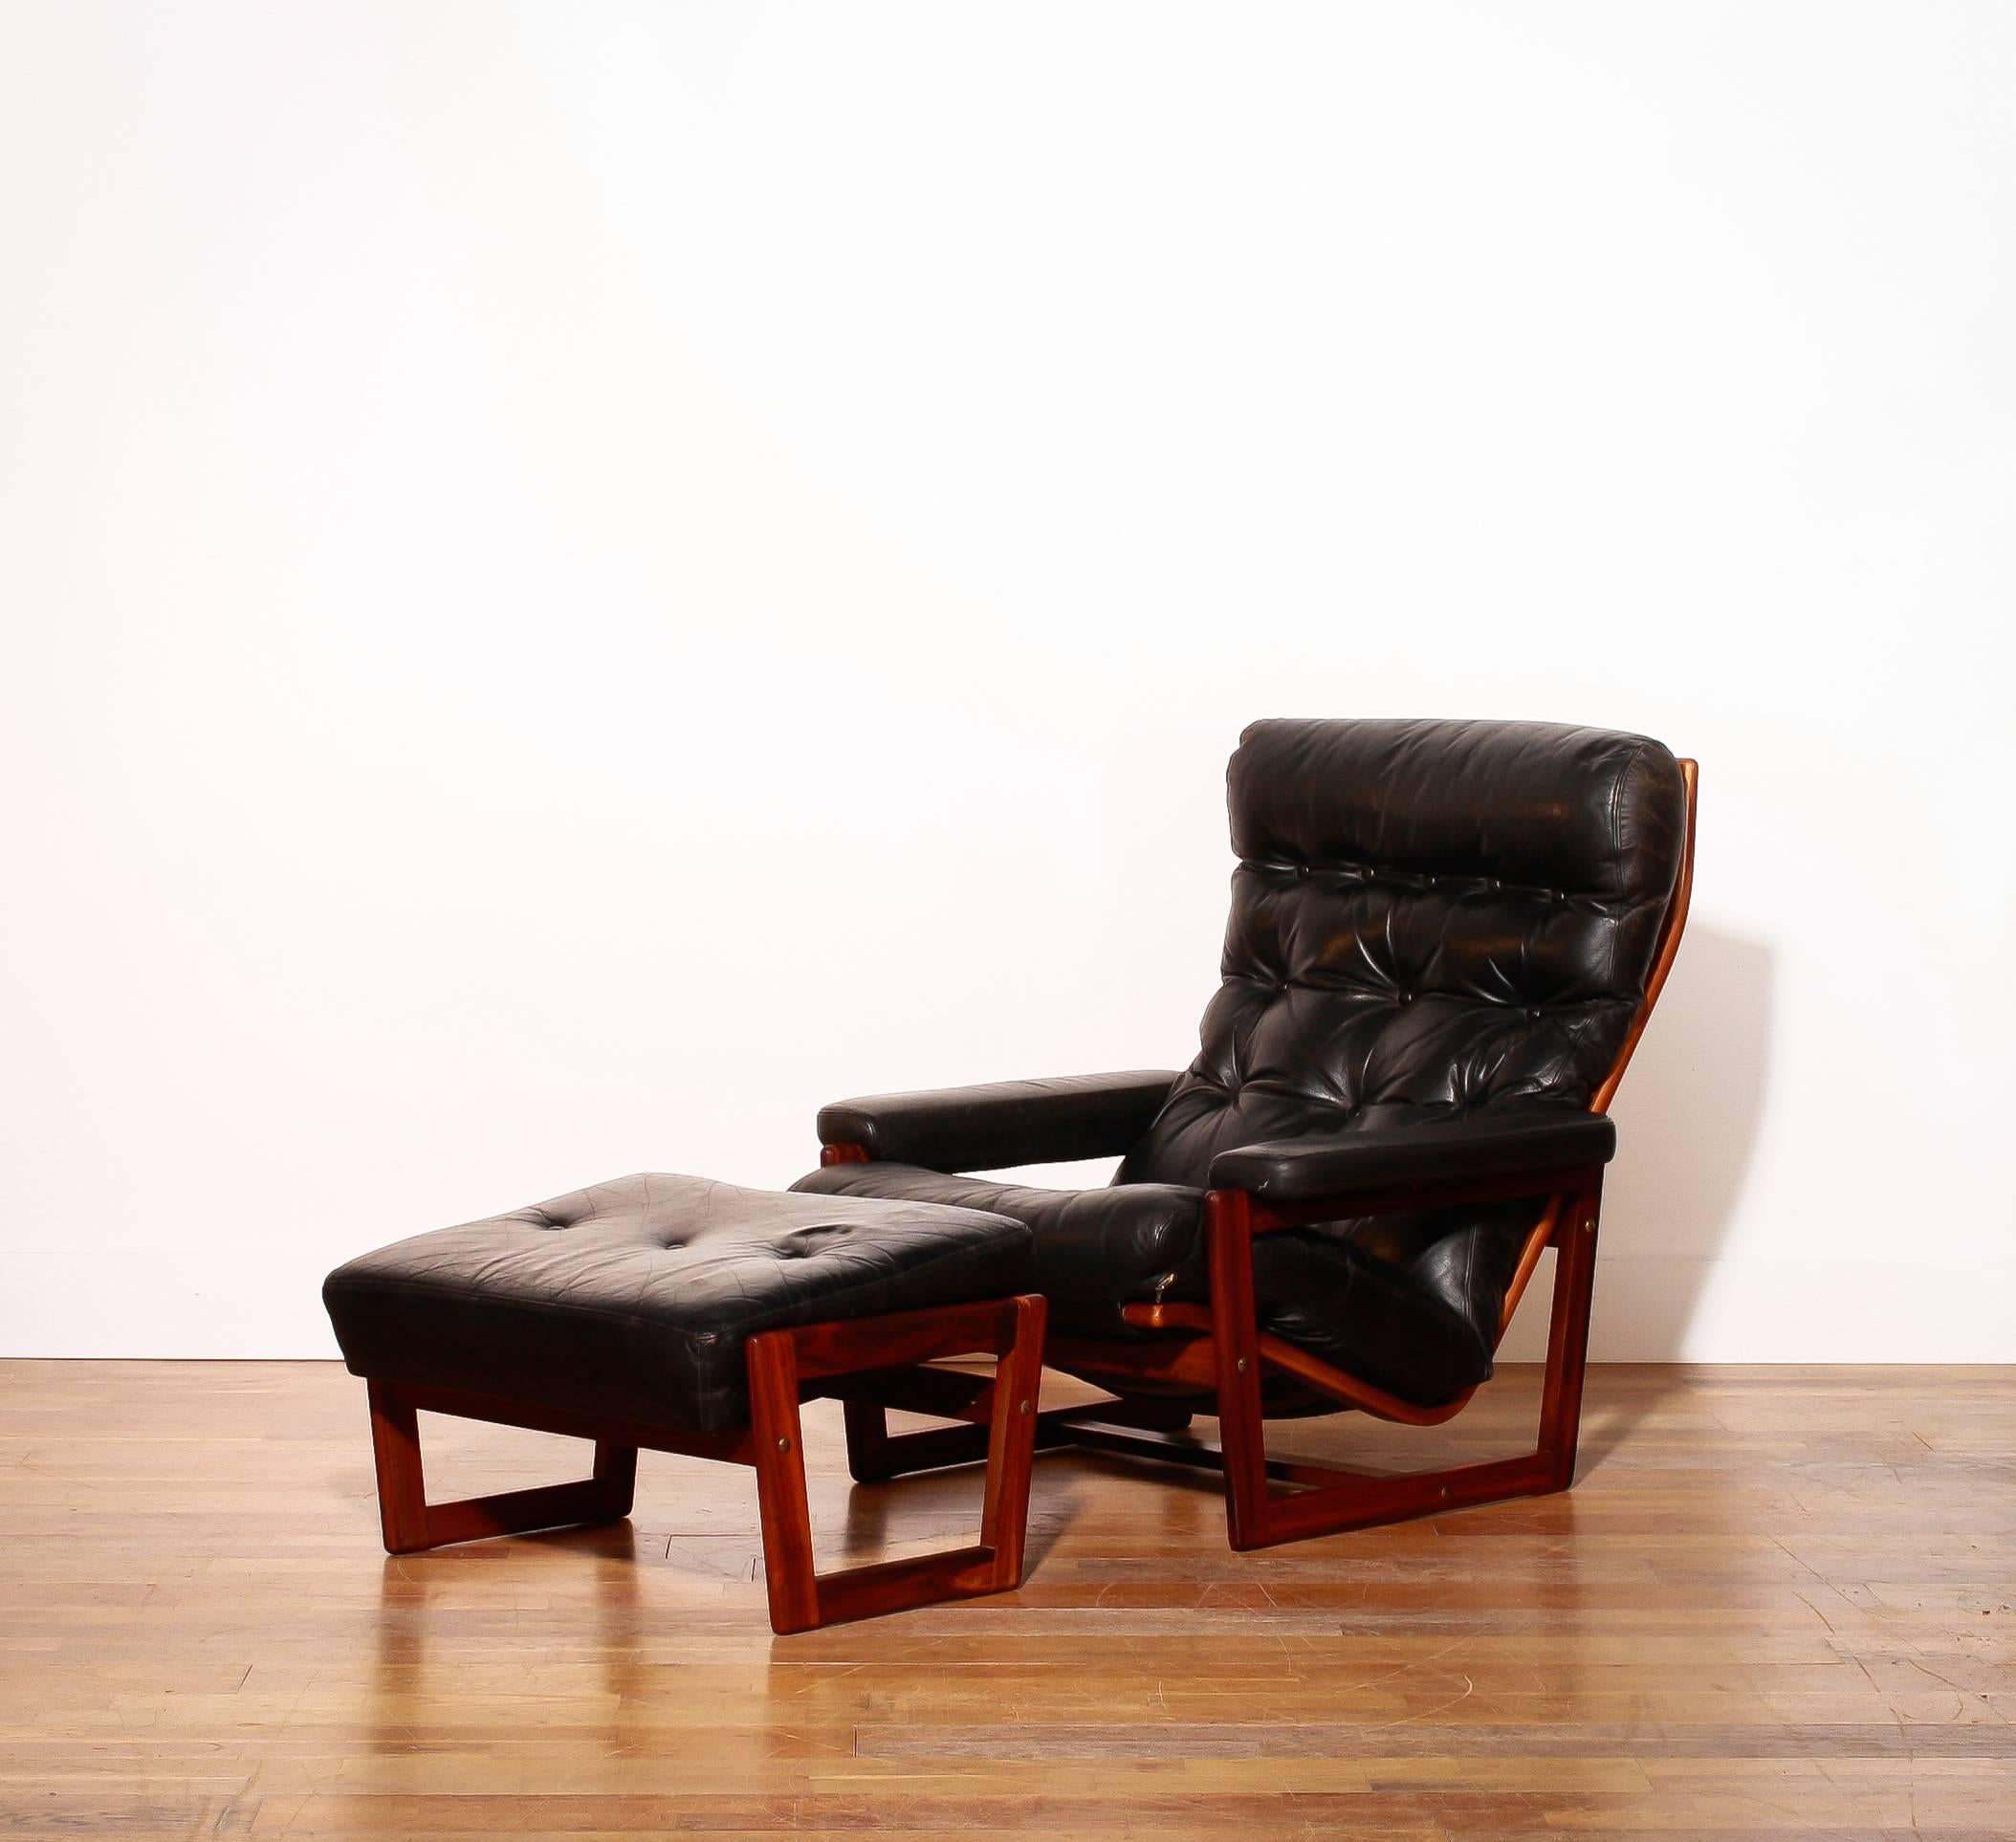 Beautiful lounge chair with ottoman.
The designer is Lennart Bender and is produced by Møbelfabriken Tibro Sweden Ulferts.
The chair has a very nice wooden frame with black leather upholstery.
The condition is excellent,
Period 1950-1960.
The